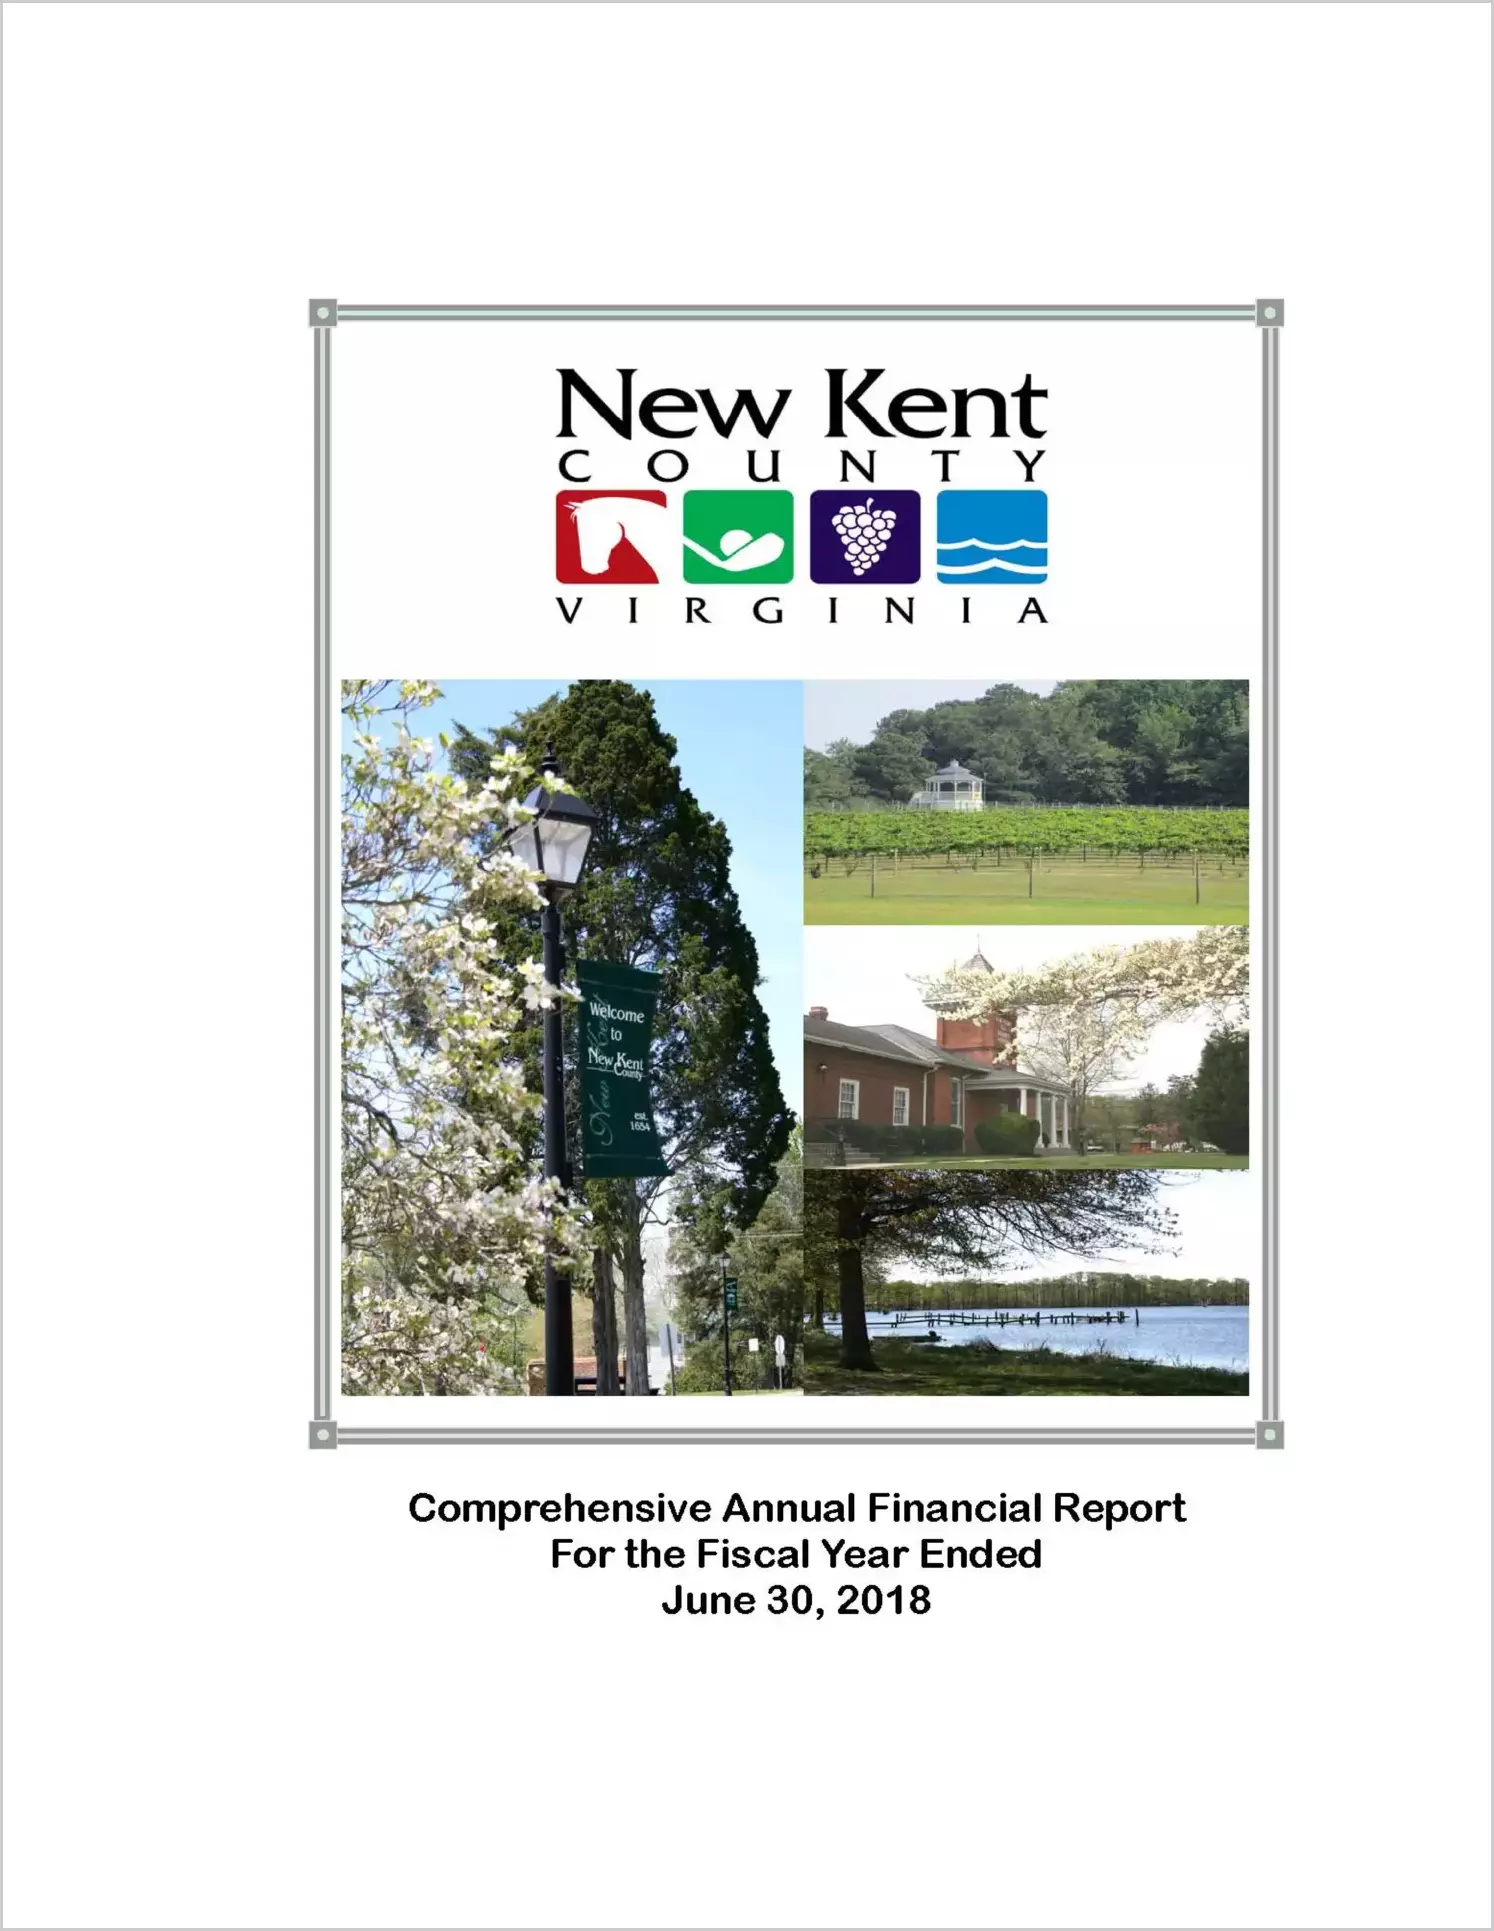 2018 Annual Financial Report for County of New Kent